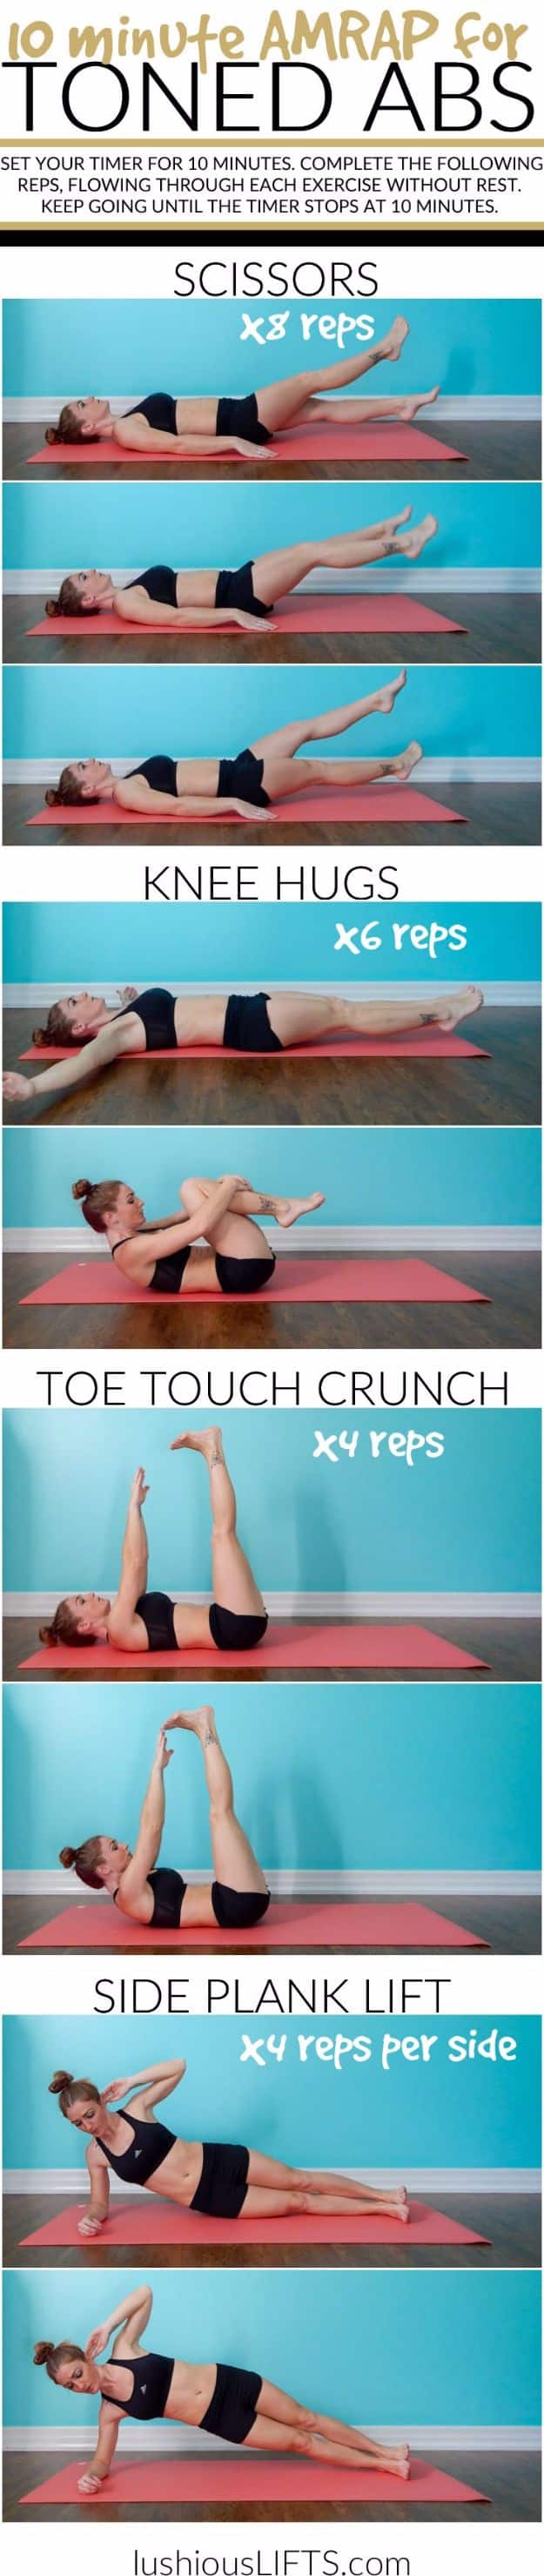 Best Quick At Home Workouts - 10 Minute Amrap For Toned Abs - Easy Tutorials and Work Out Ideas for Strength Training and Exercises - Step by Step Tutorials for Butt Workouts, Abs Tummy and Stomach, Legs, Arms, Chest and Back - Fast 5 and 10 Minute Workouts You Can Do On Your Lunch Break, In Car, in Hotel #exercise #health